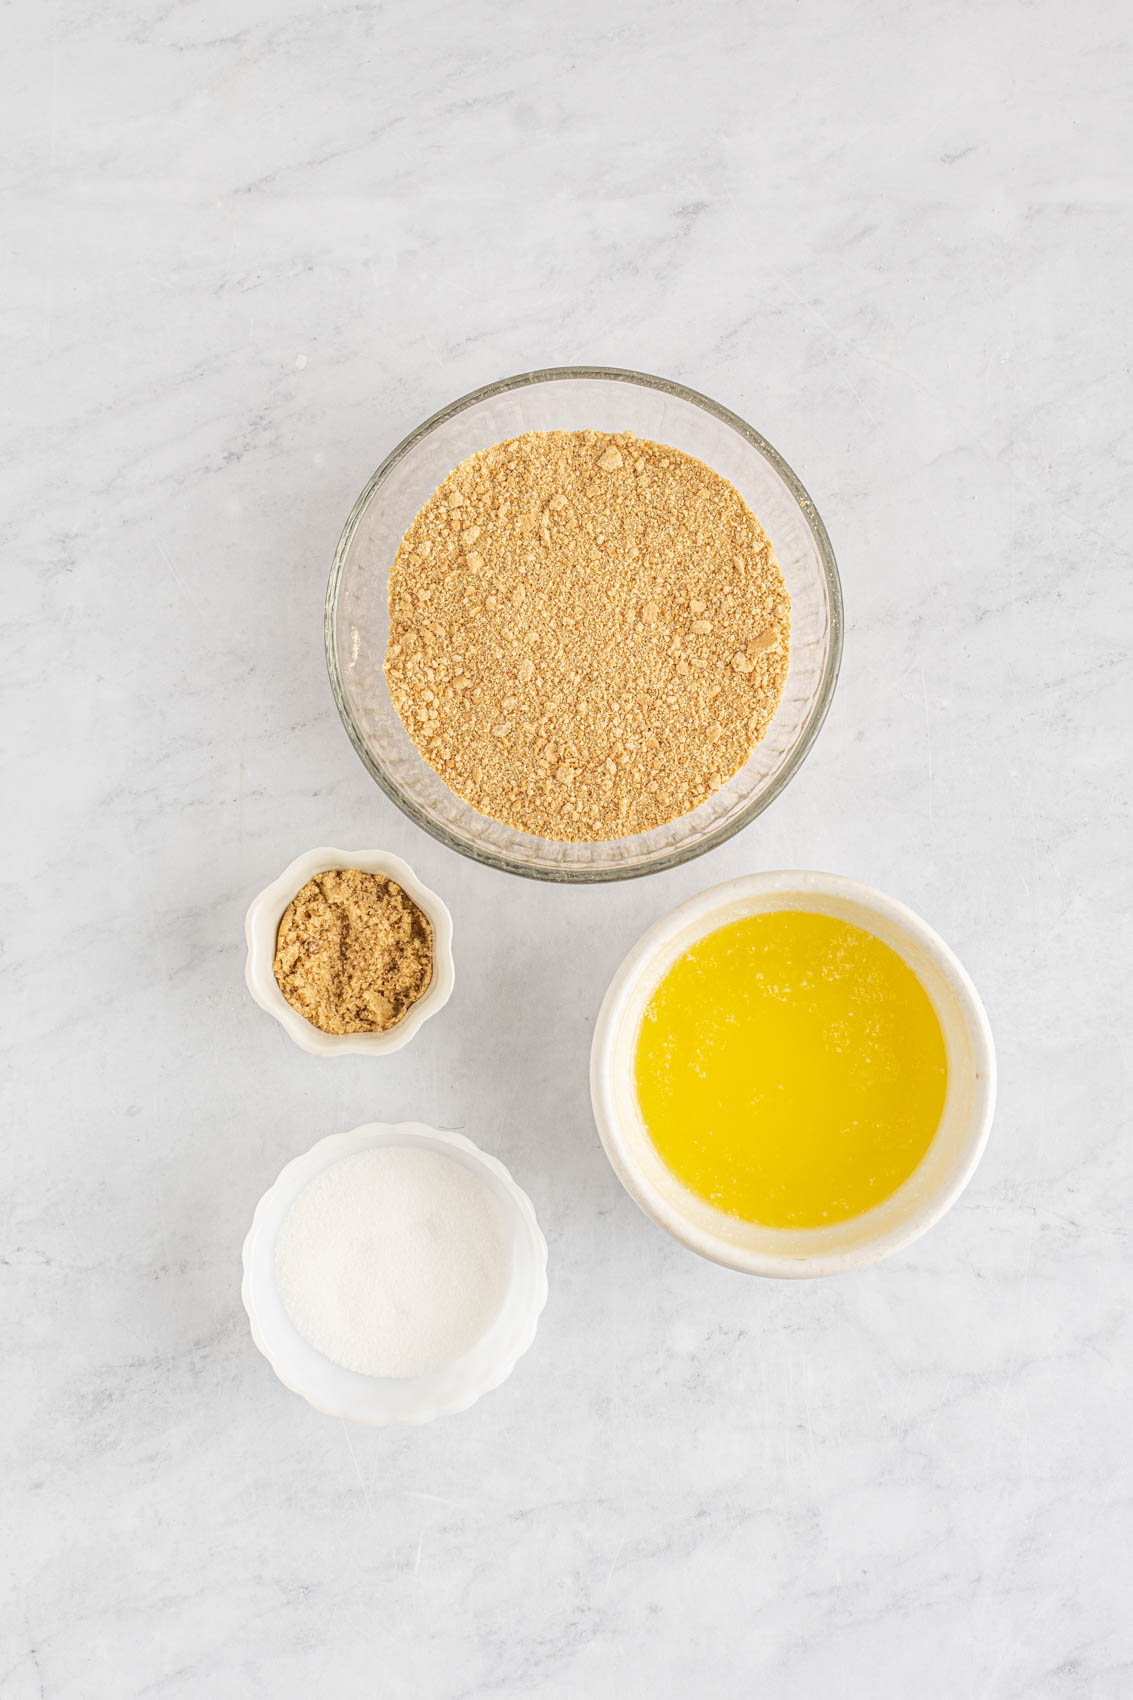 cheesecake crust ingredients, including butter, crumbs and cream cheese